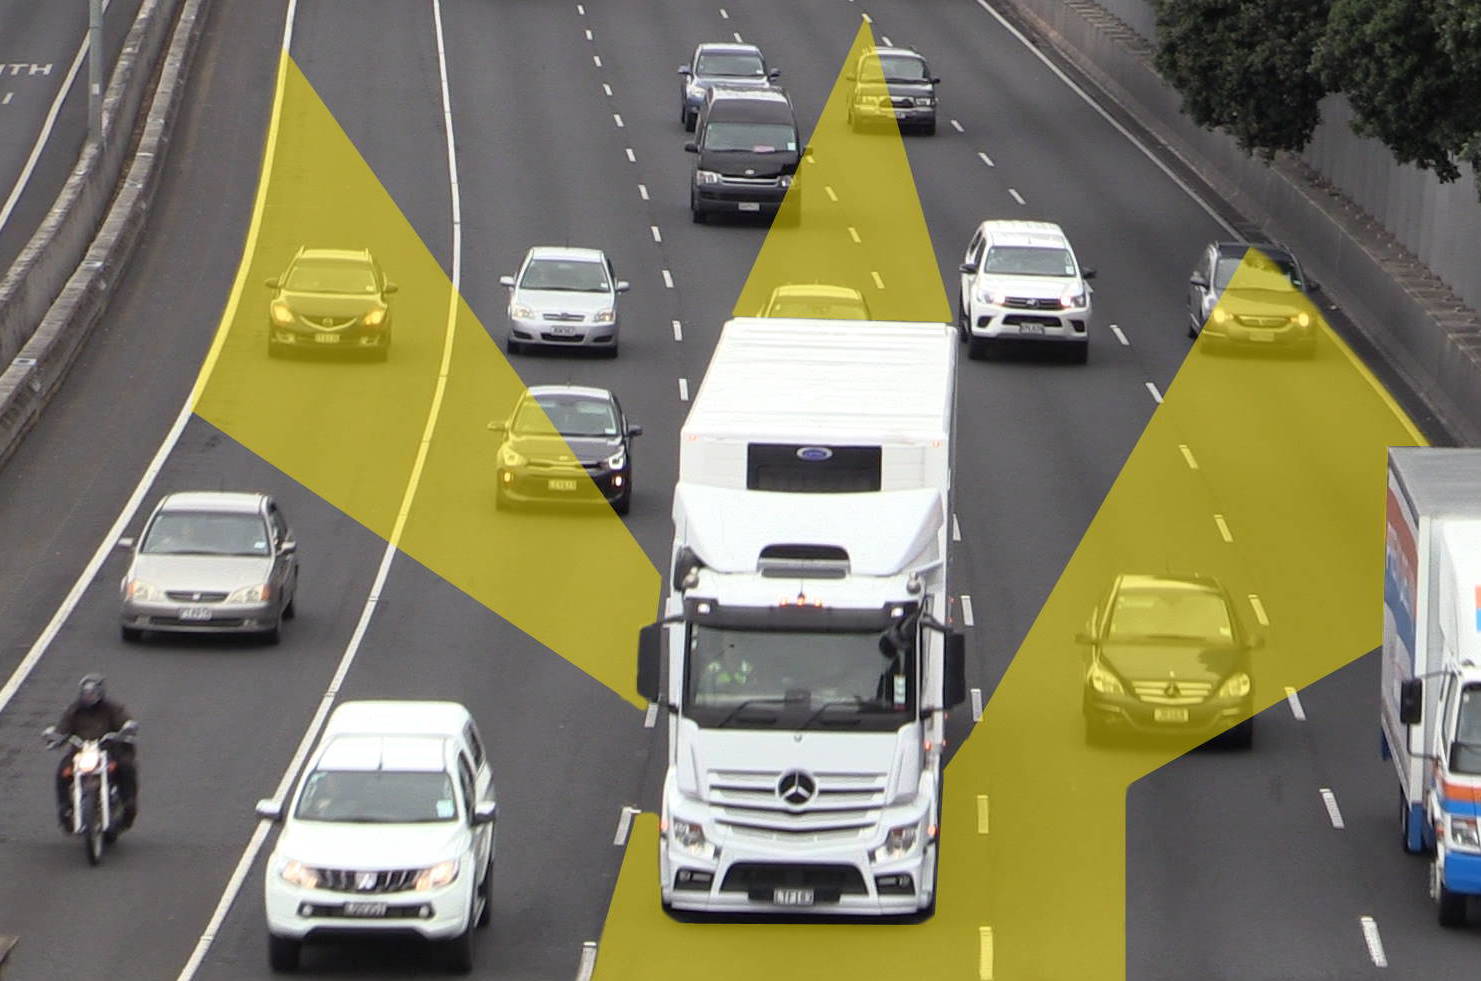 Check Your Blind Spots While Driving, Can You Use Blind Spot Mirrors On Driving Test